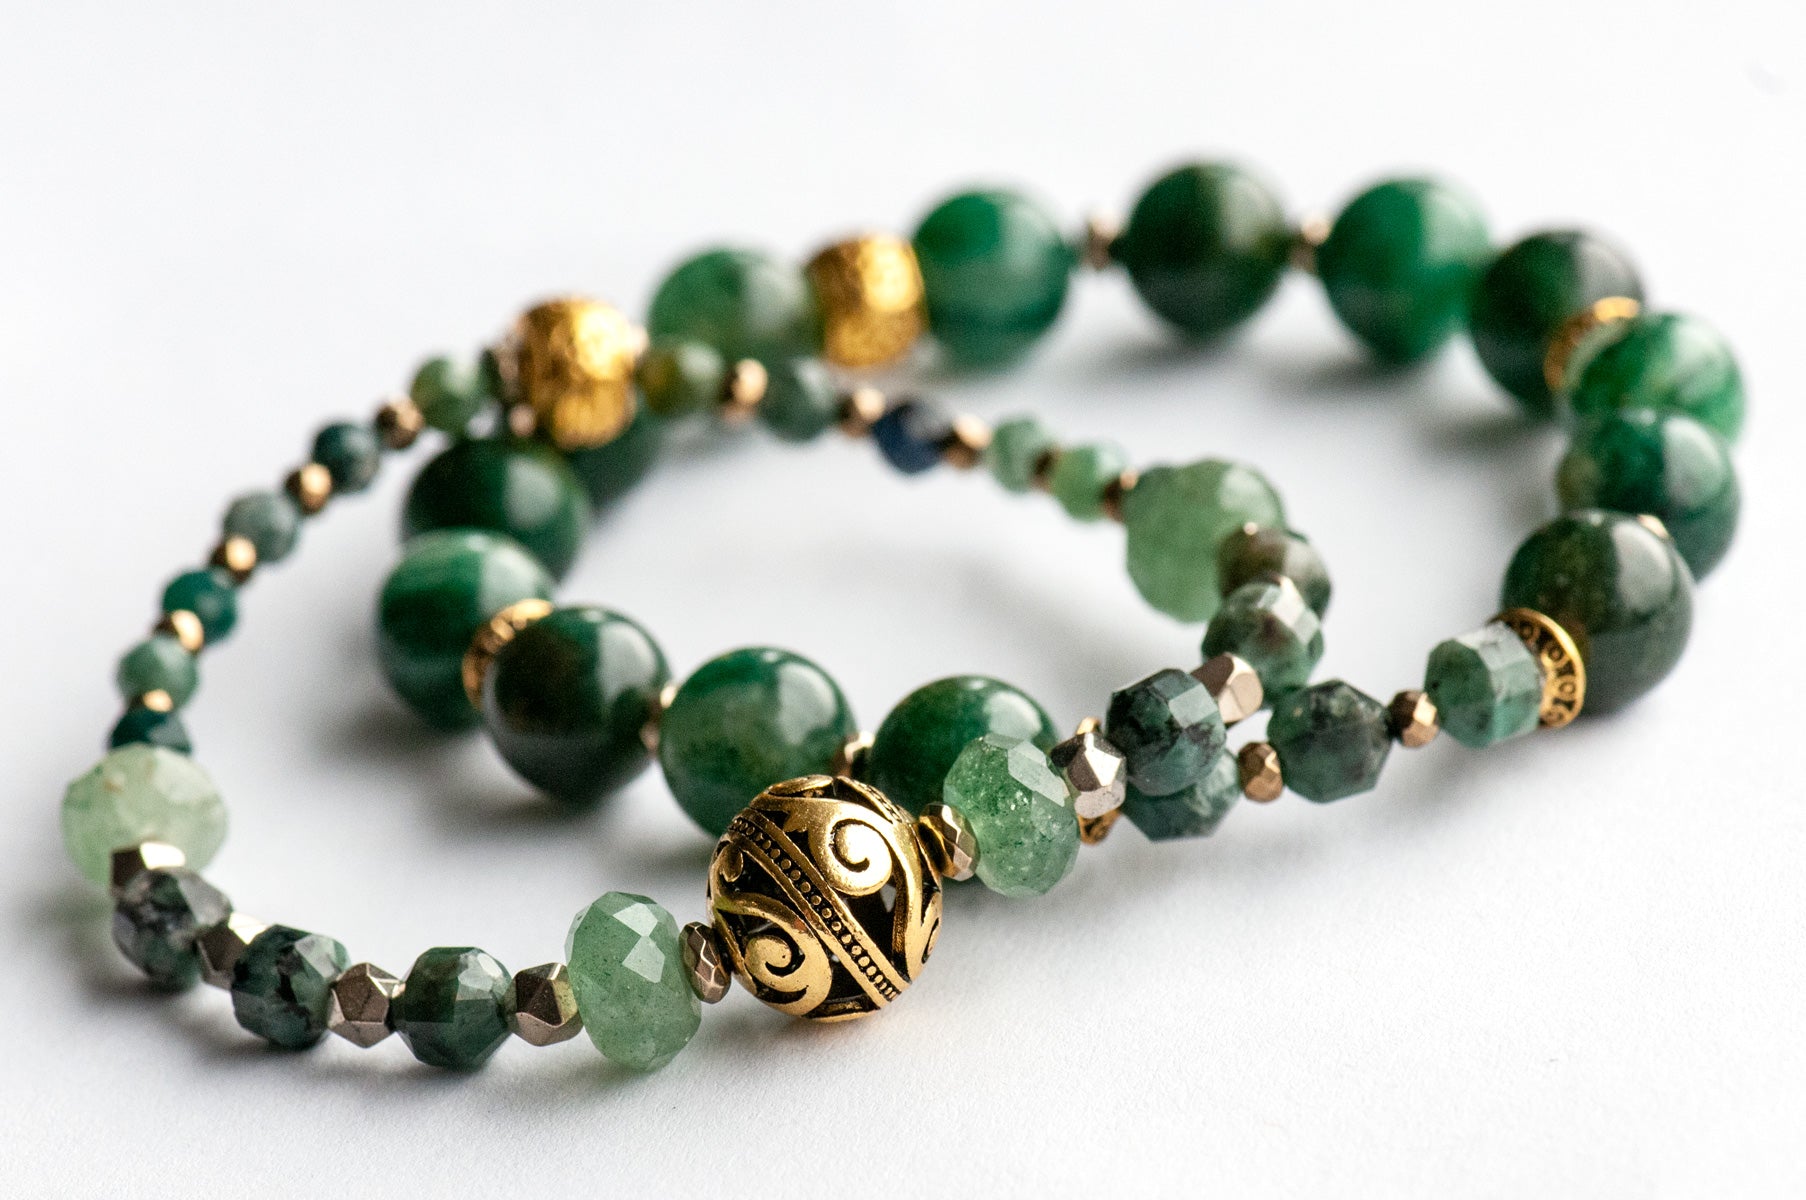 May birthstone bracelet featuring green gemstones: emerald, mica, green strawberry quartz, and moss agate, with gold hematite and gold plated accent beads. Handmade in New Brunswick Canada